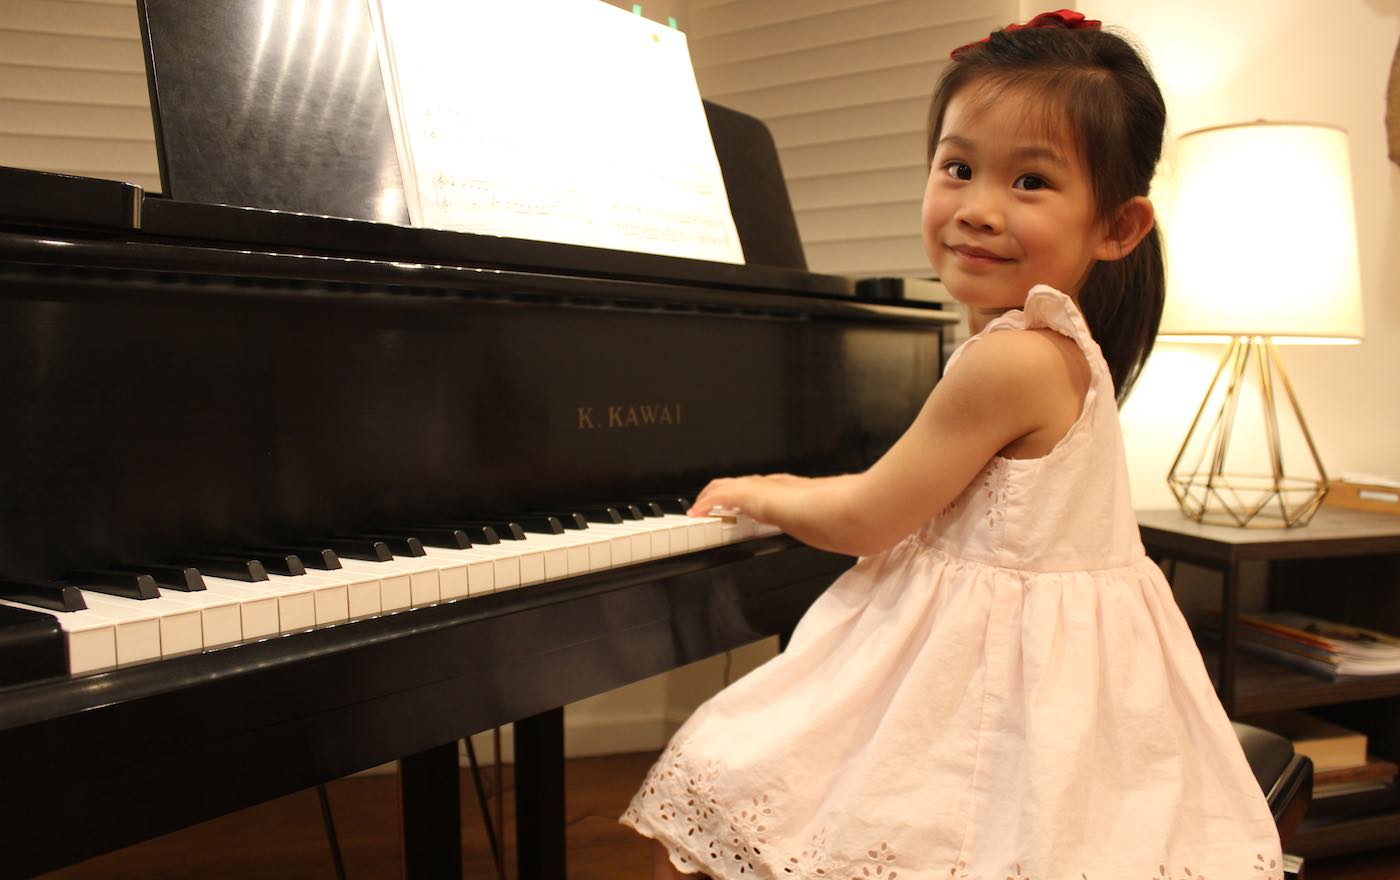 4-Yr-Old Who Learned Piano Over Lockdown Wins Elite International Competition